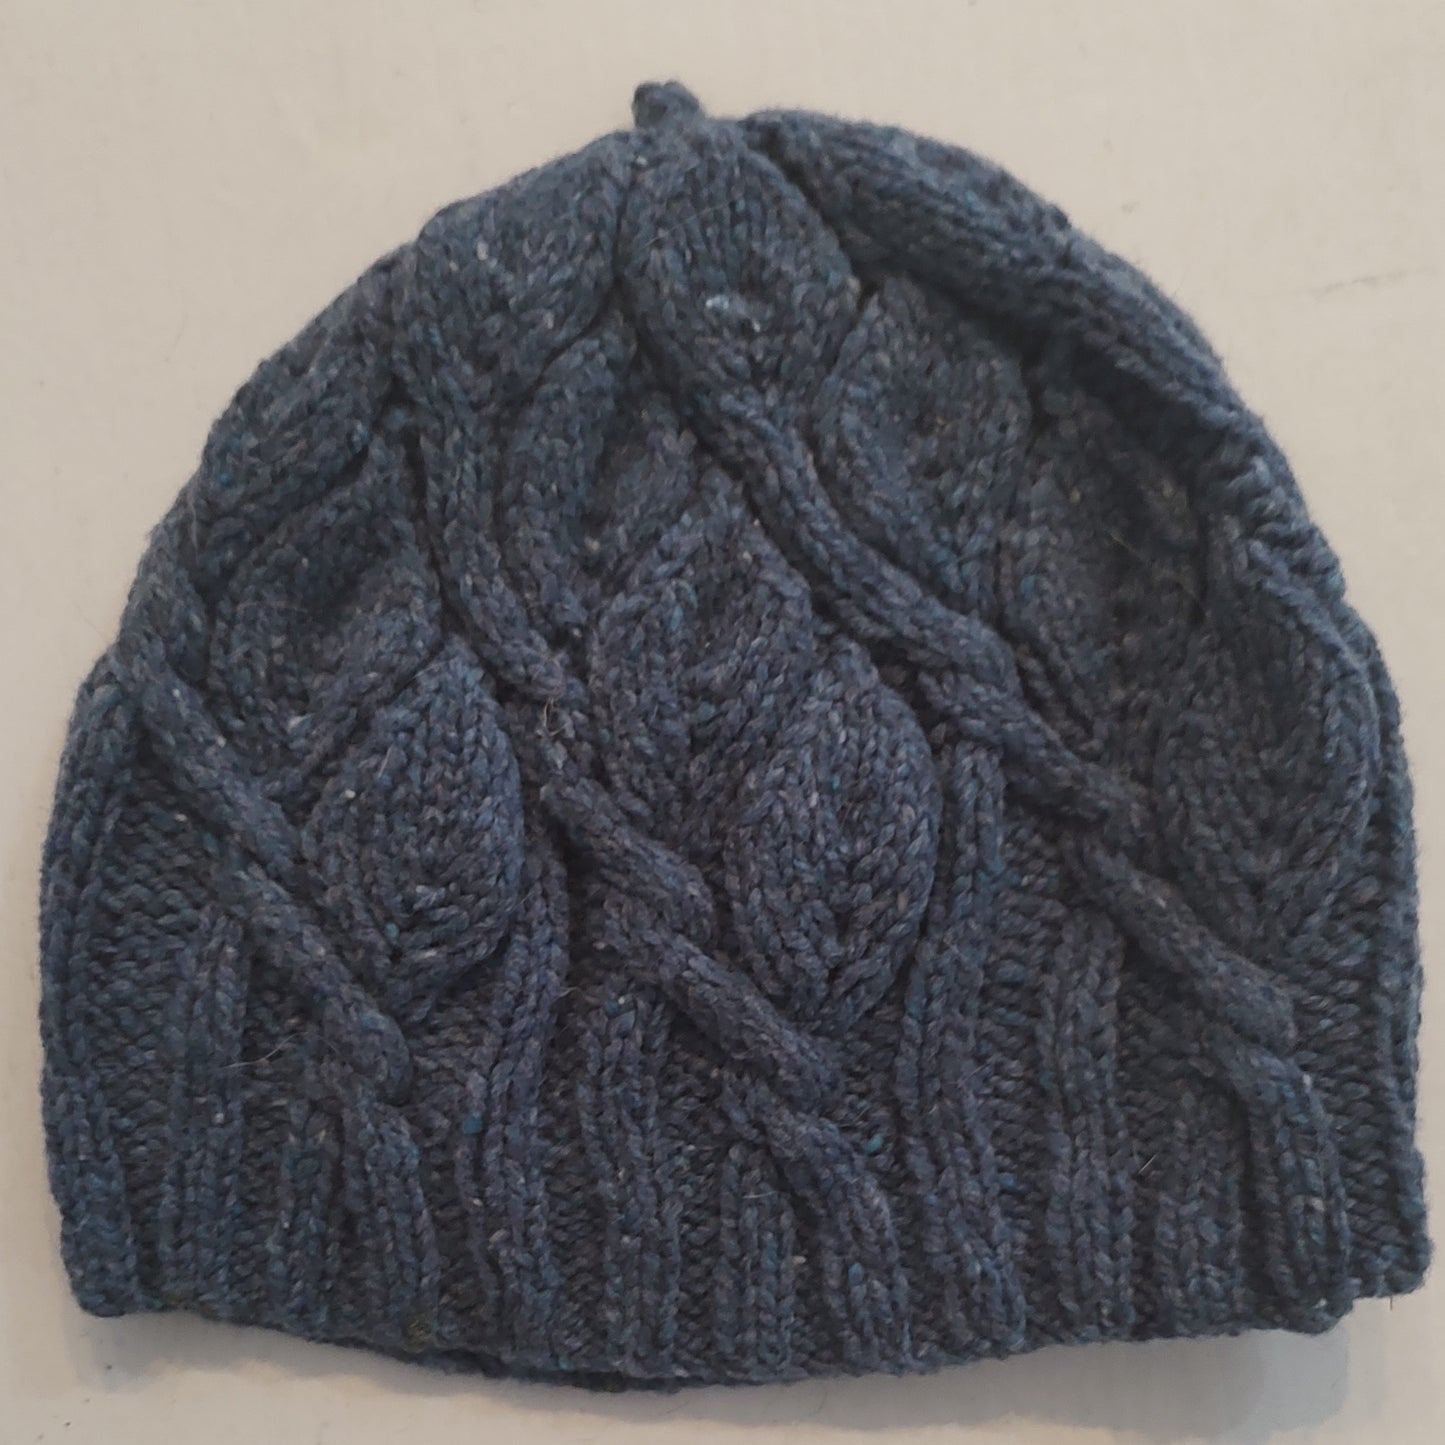 Knitted Hat - cabled hat